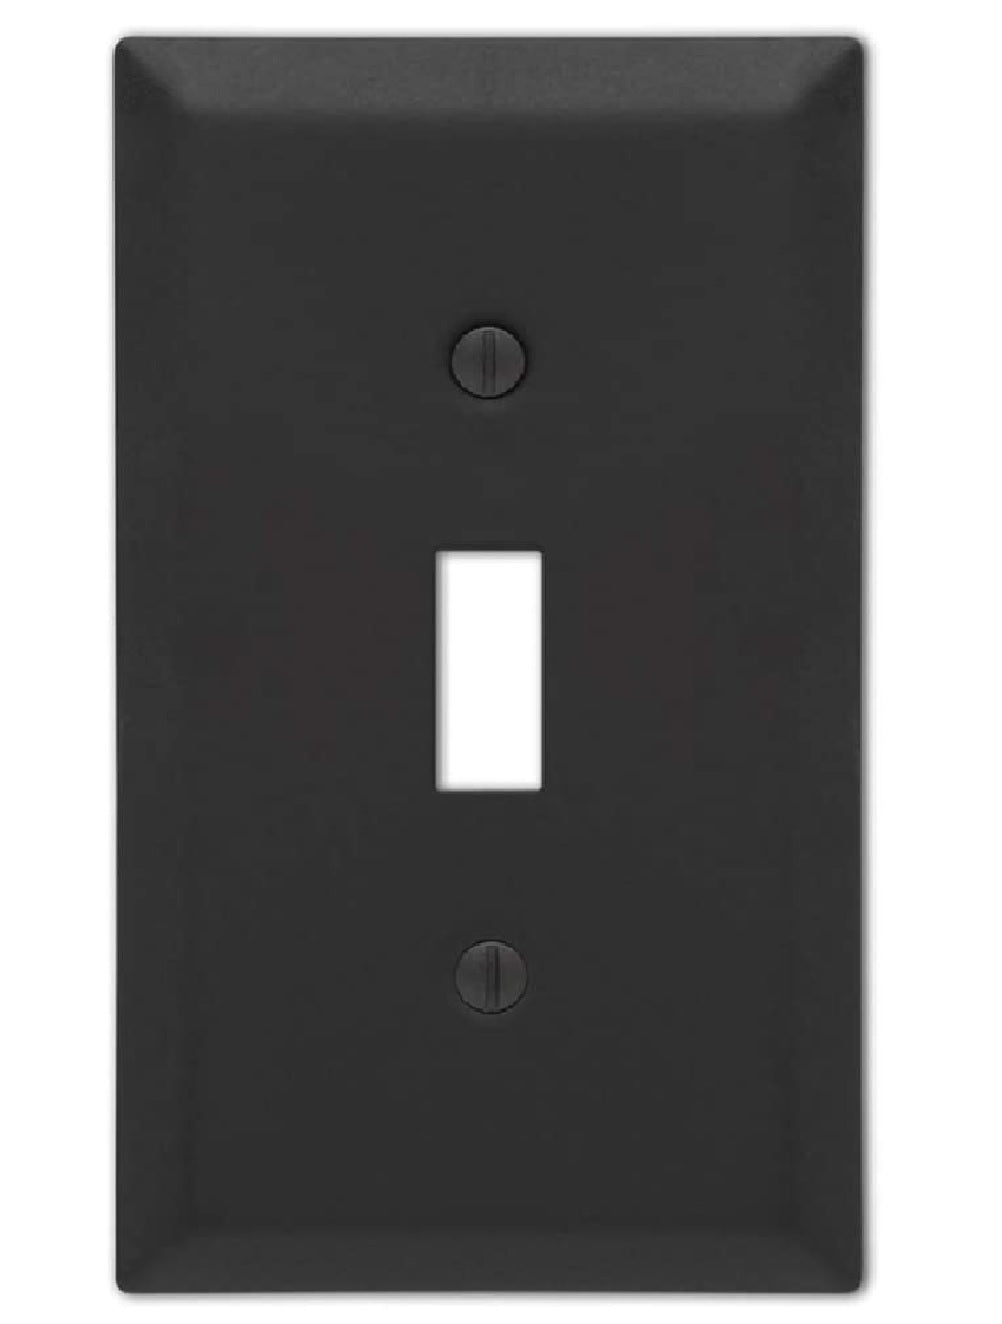 Amerelle 163TMB Century Toggle Wall Plate, Matte Black, Stamped Steel